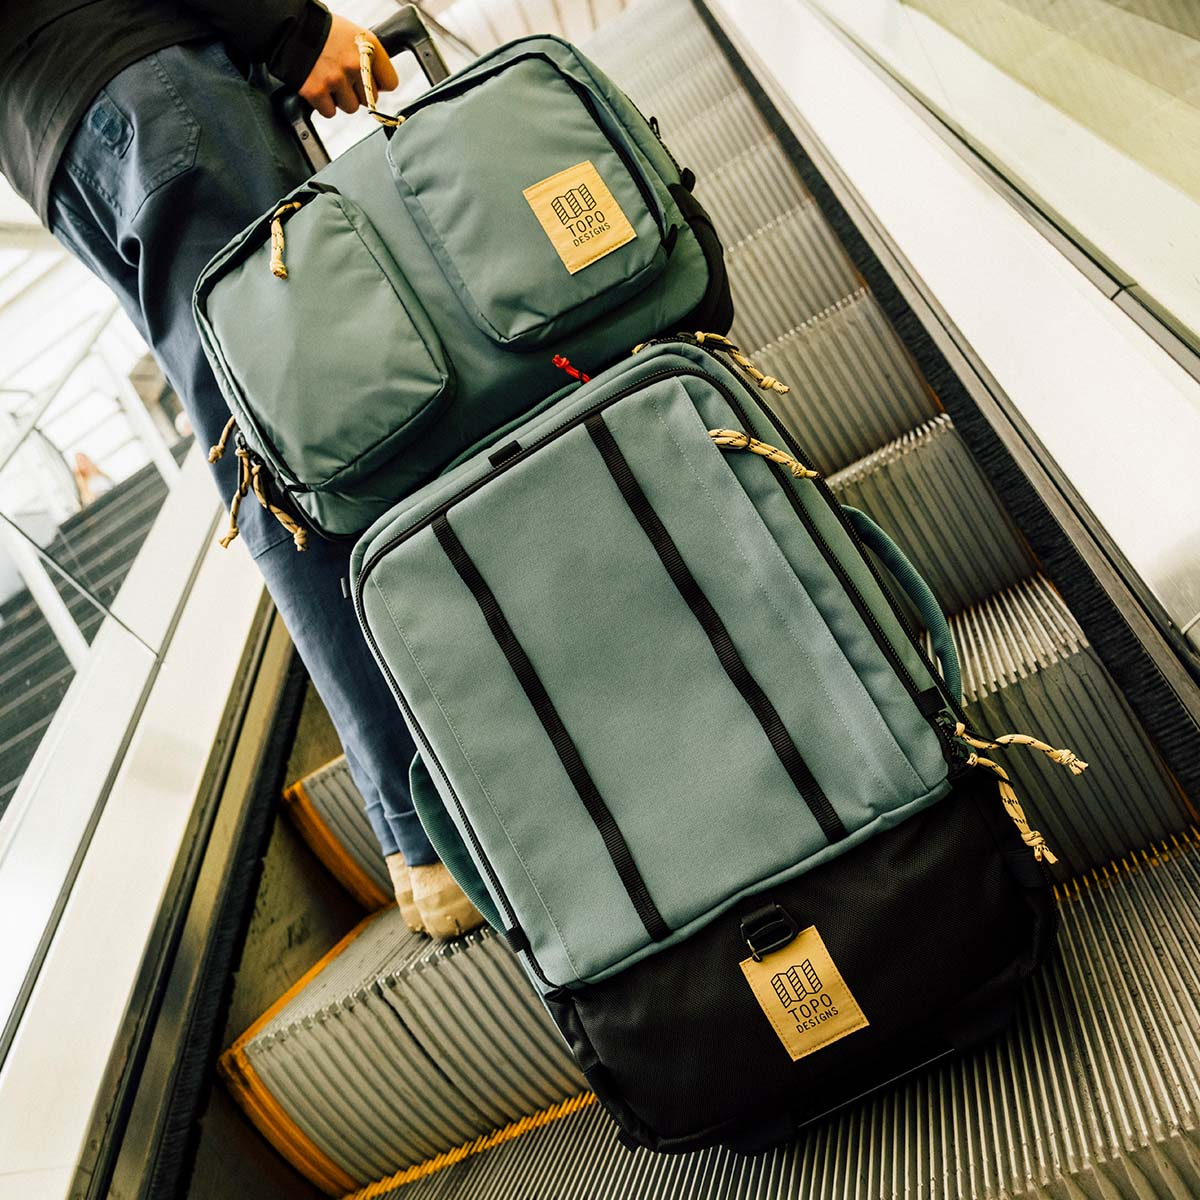 Topo Designs Global Travel Bag Roller Sea Pine, built to travel as easy as possible